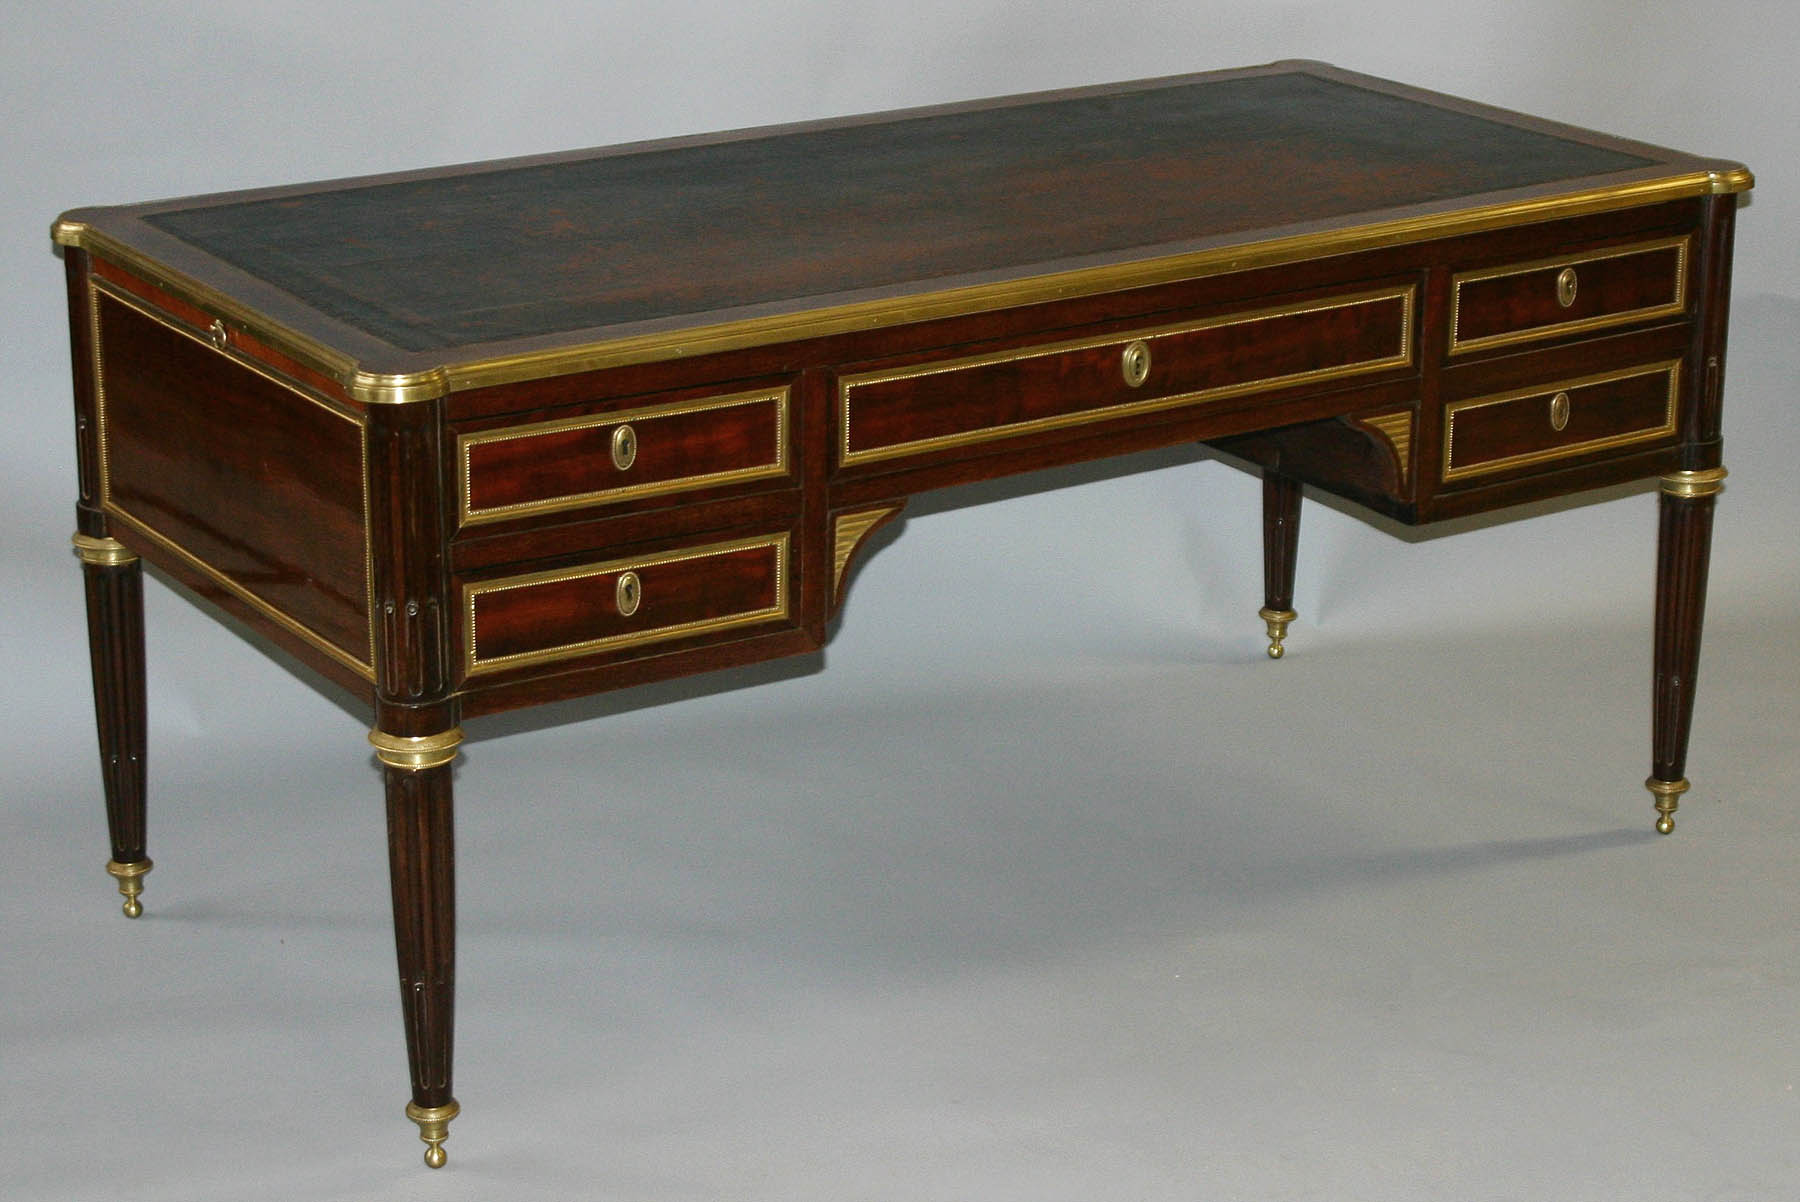 Very fine French, Neoclassical style, brass-mounted bureau plat